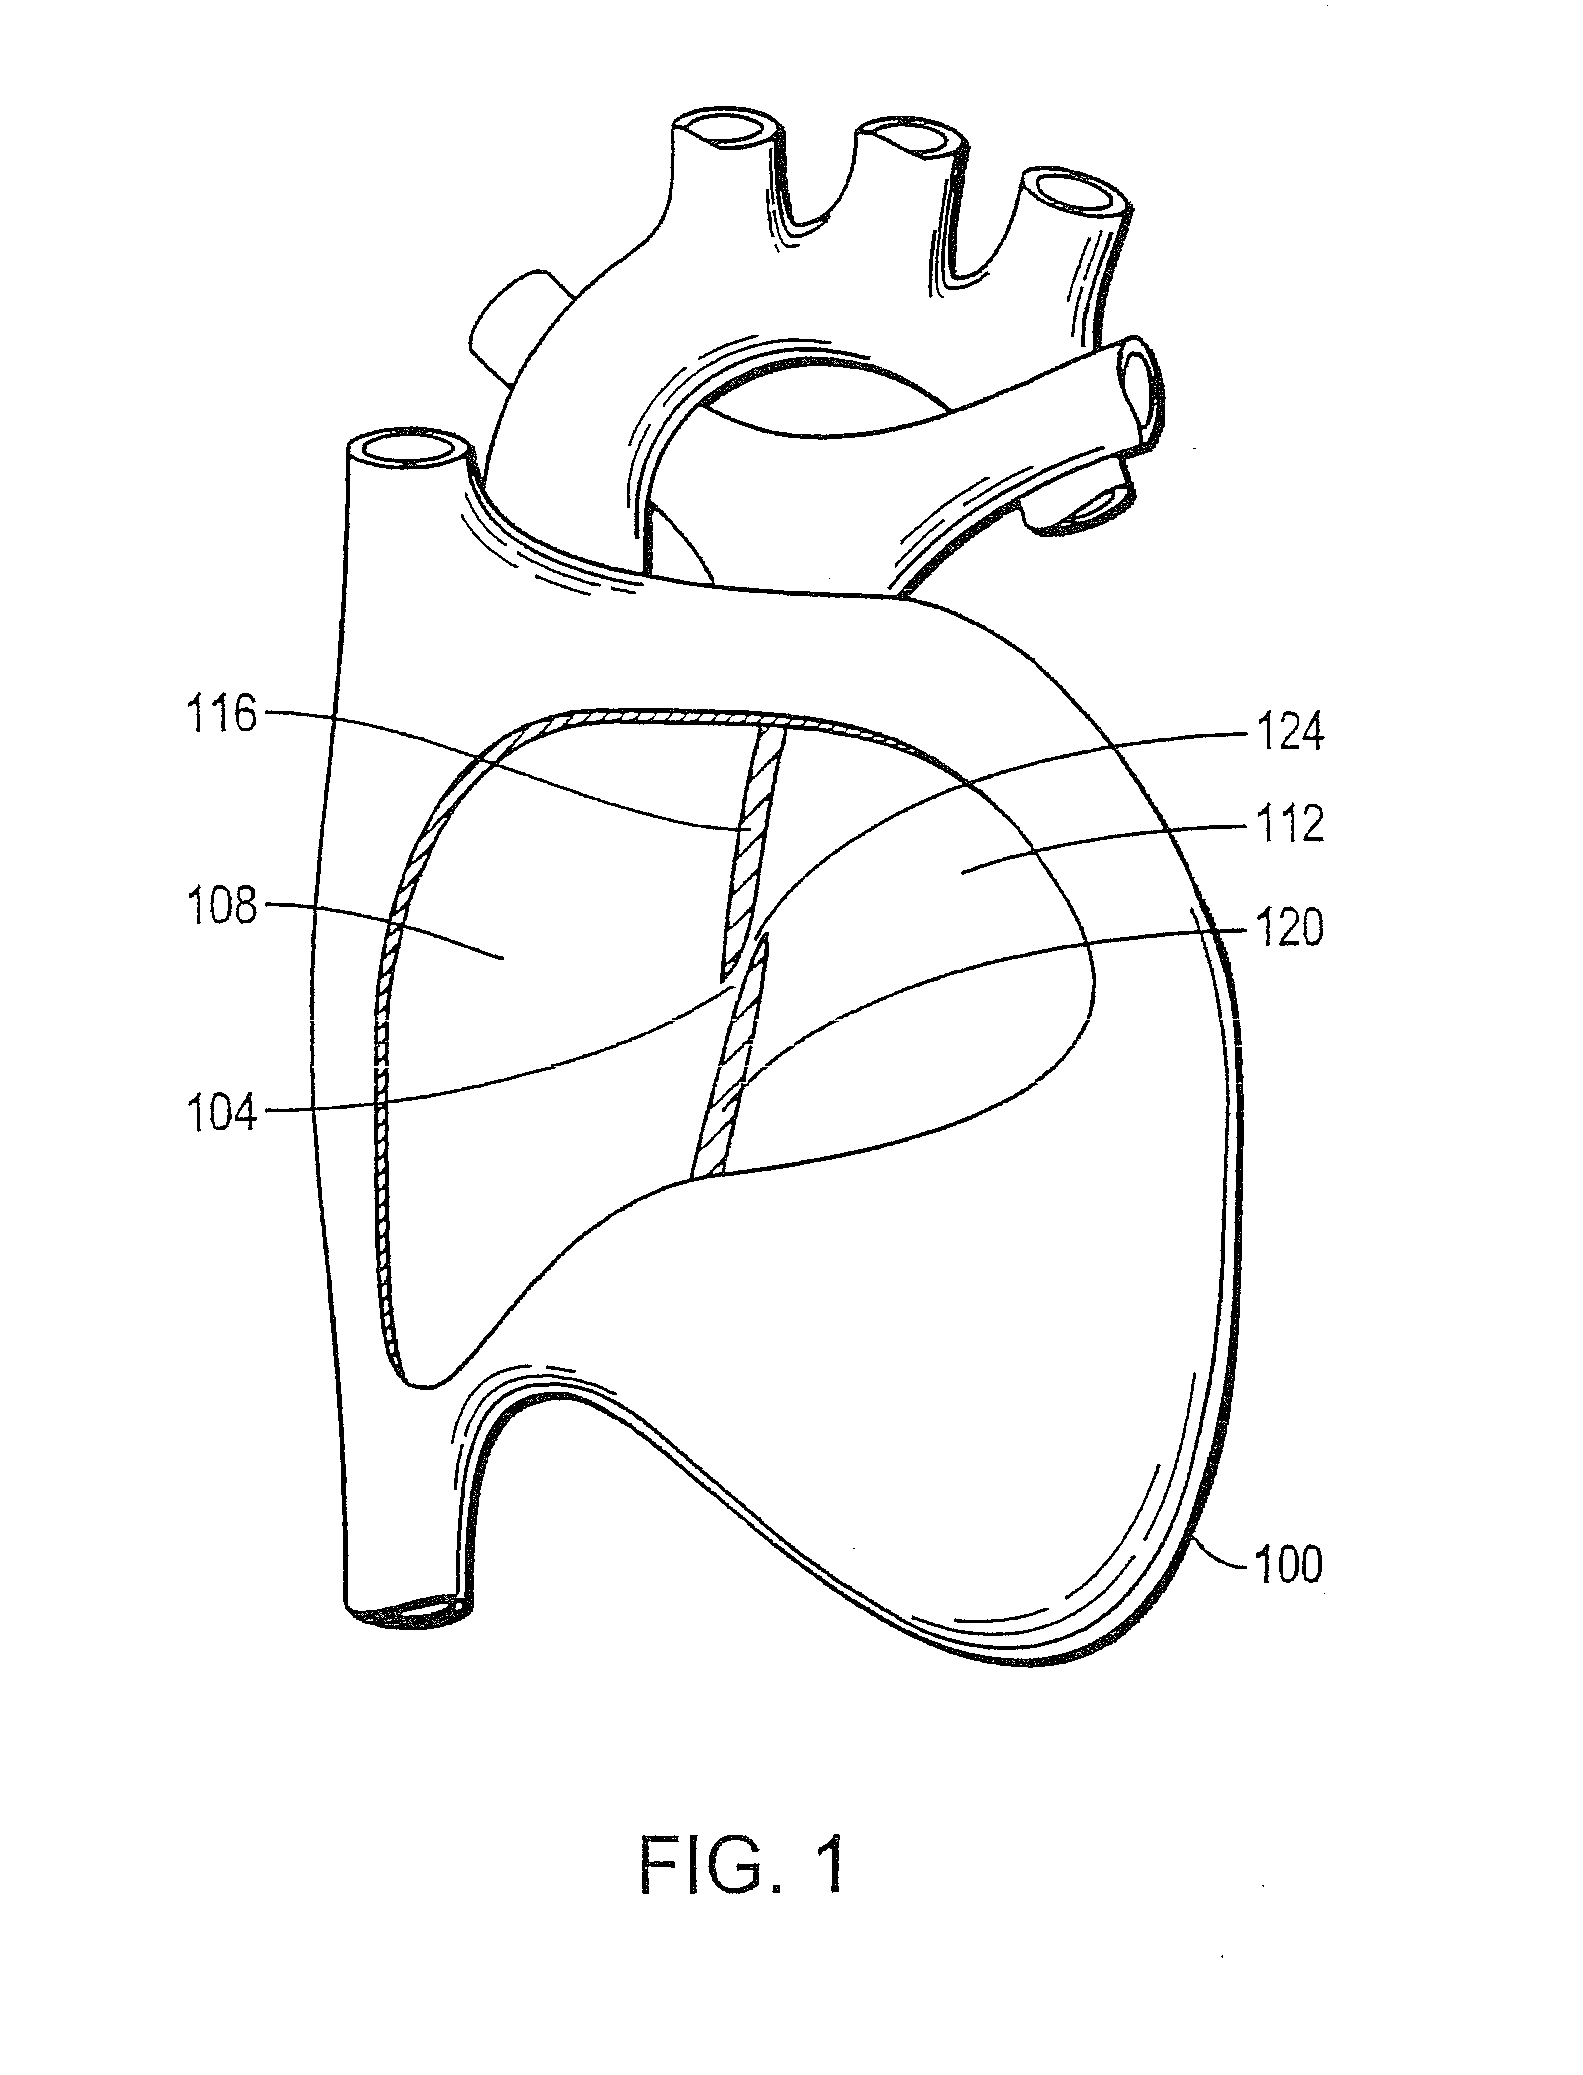 Device with Biological Tissue Scaffold for Percutaneous Closure of an Intracardiac Defect and Methods Thereof